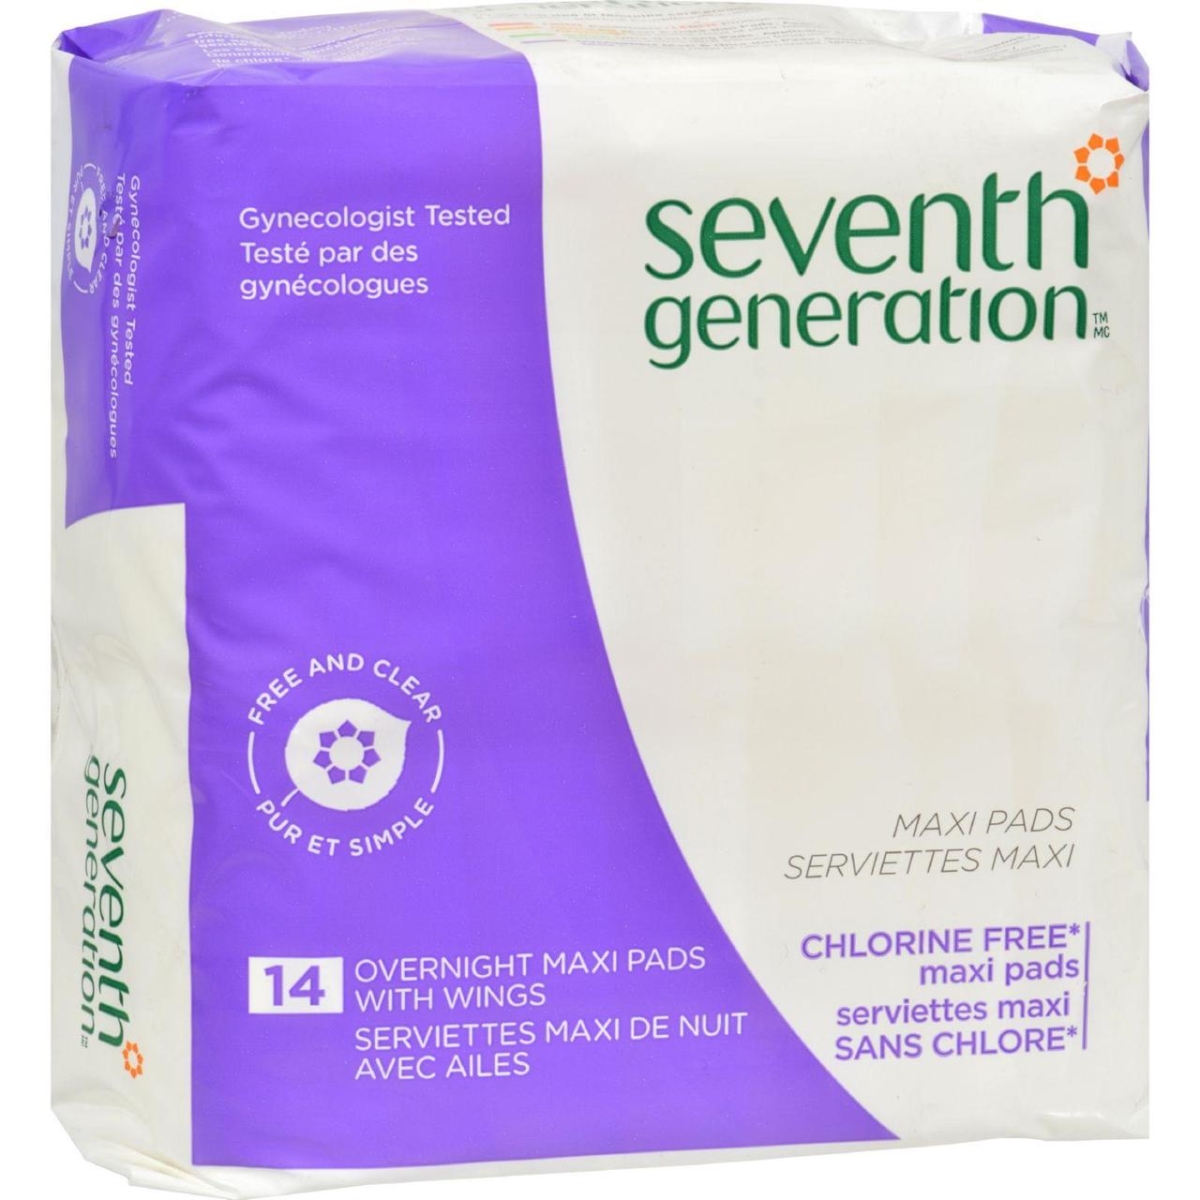 Hg0772640 Chorine Free Maxi Pads - Overnight With Wings, 14 Pads